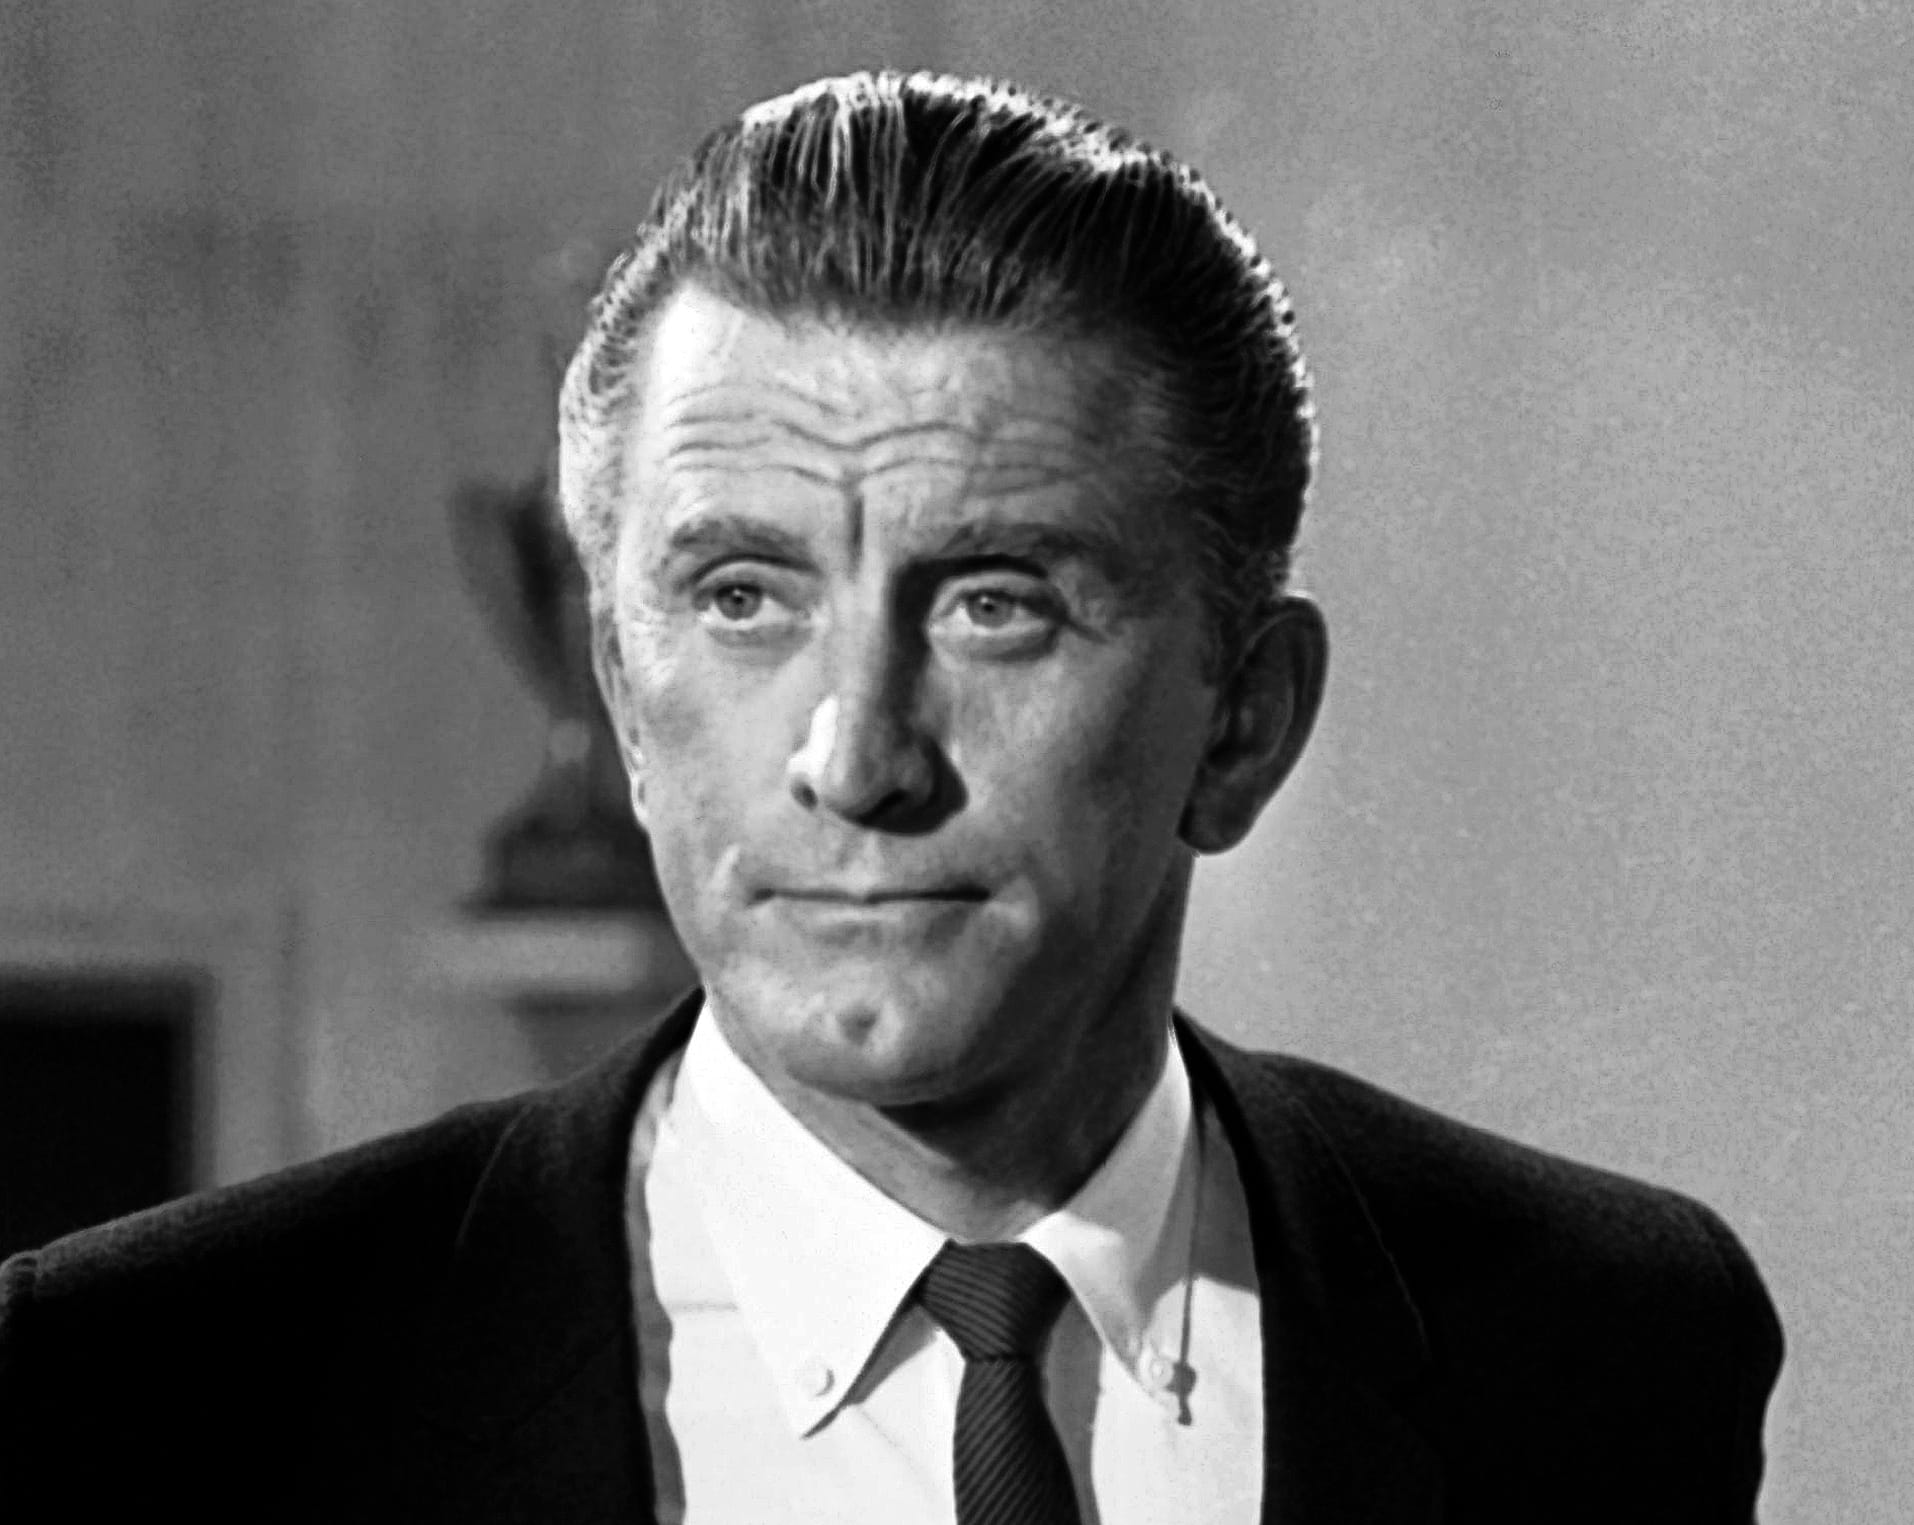 FILE - This Aug. 9, 1962 file photo shows actor Kirk Douglas in New York. Douglas died Wednesday, Feb. 5, 2020 at age 103.